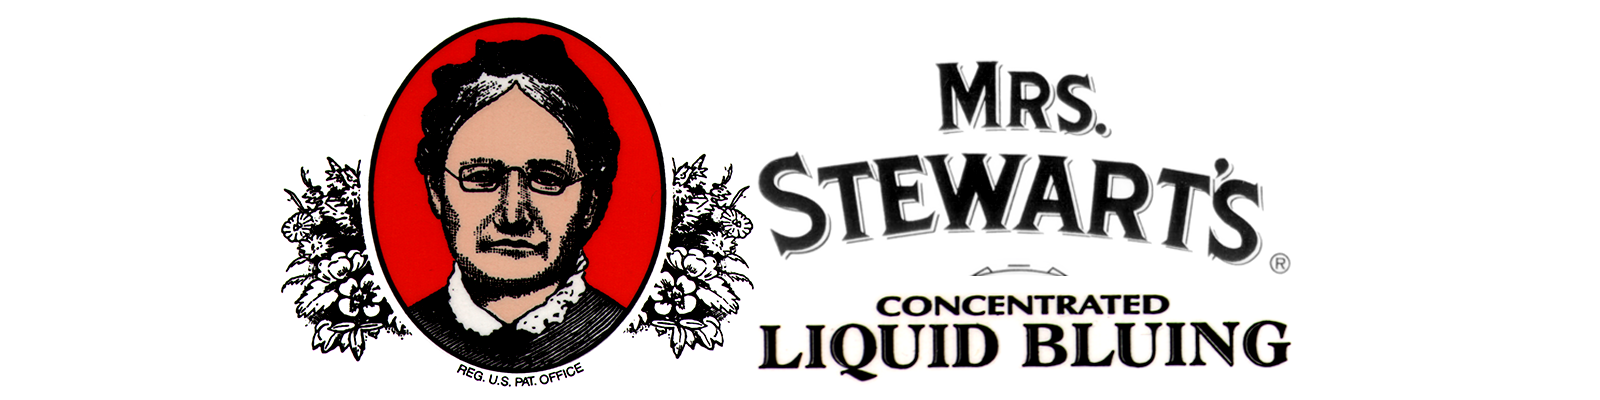 (Pack of 6) Mrs. Stewart's Concentrated Liquid Bluing, 8 fl oz Each, Bio-degradable